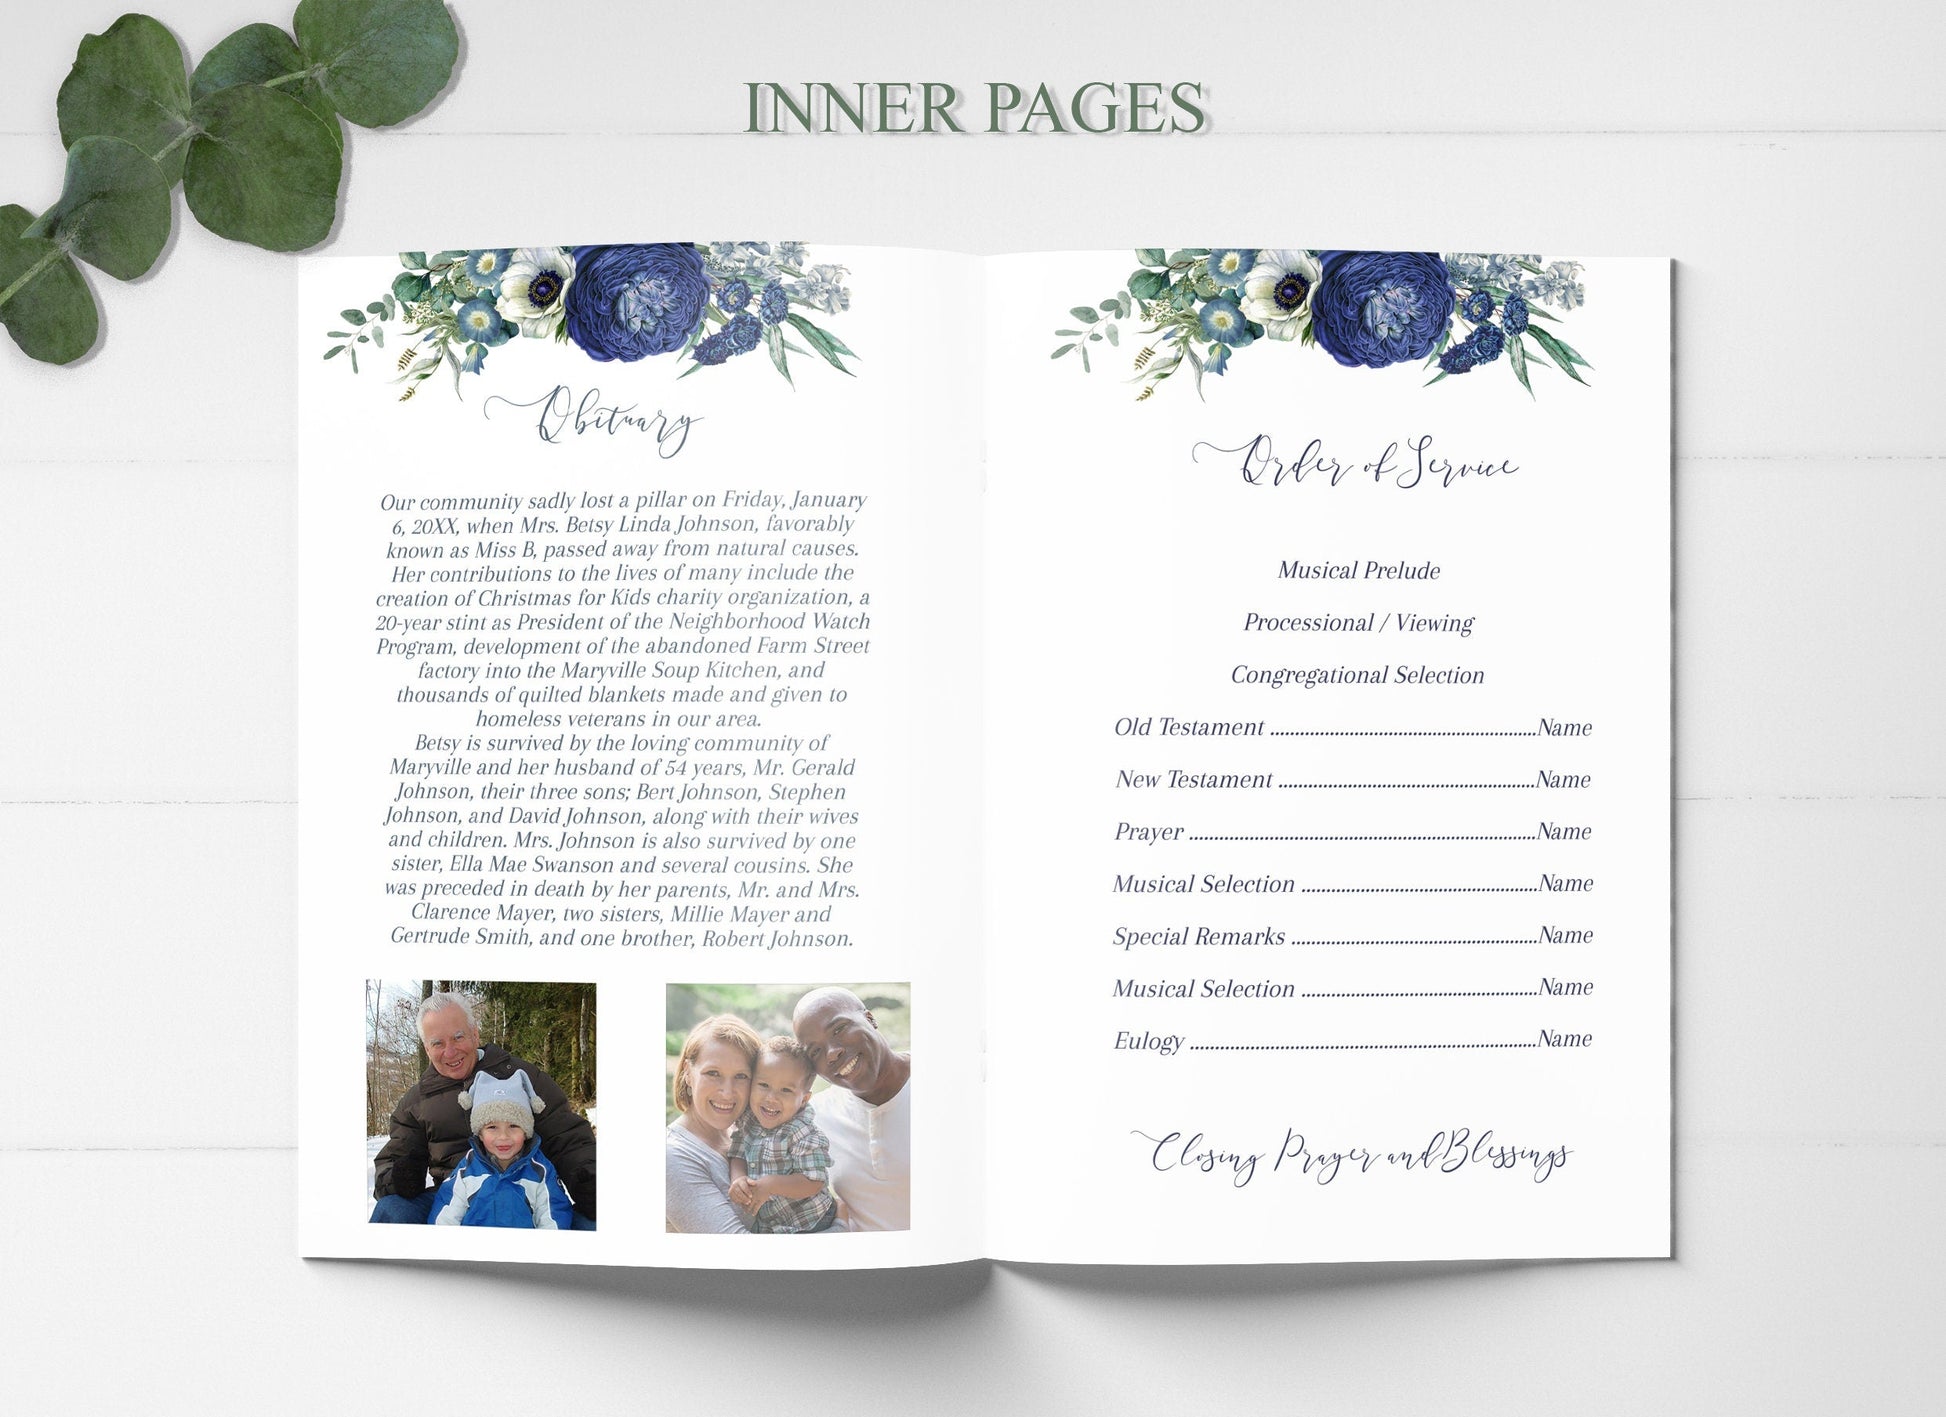 Inner pages of funeral program template deisgn obituary and order of service